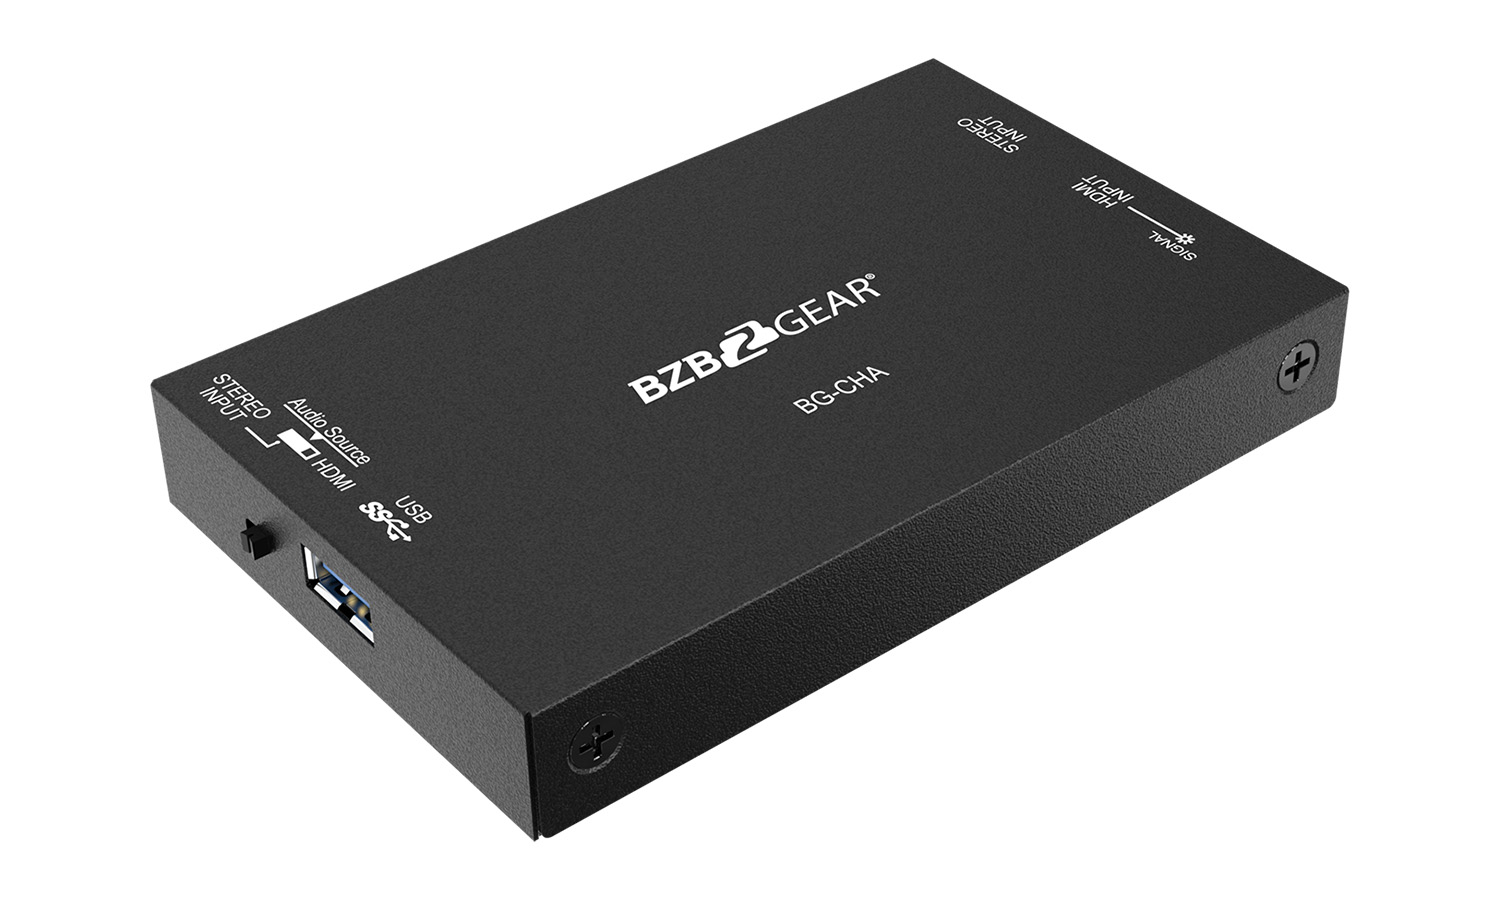 BG-CHA USB 3.1 1080P FHD HDMI Video Capture Device with Scaler and Audio by BZBGEAR